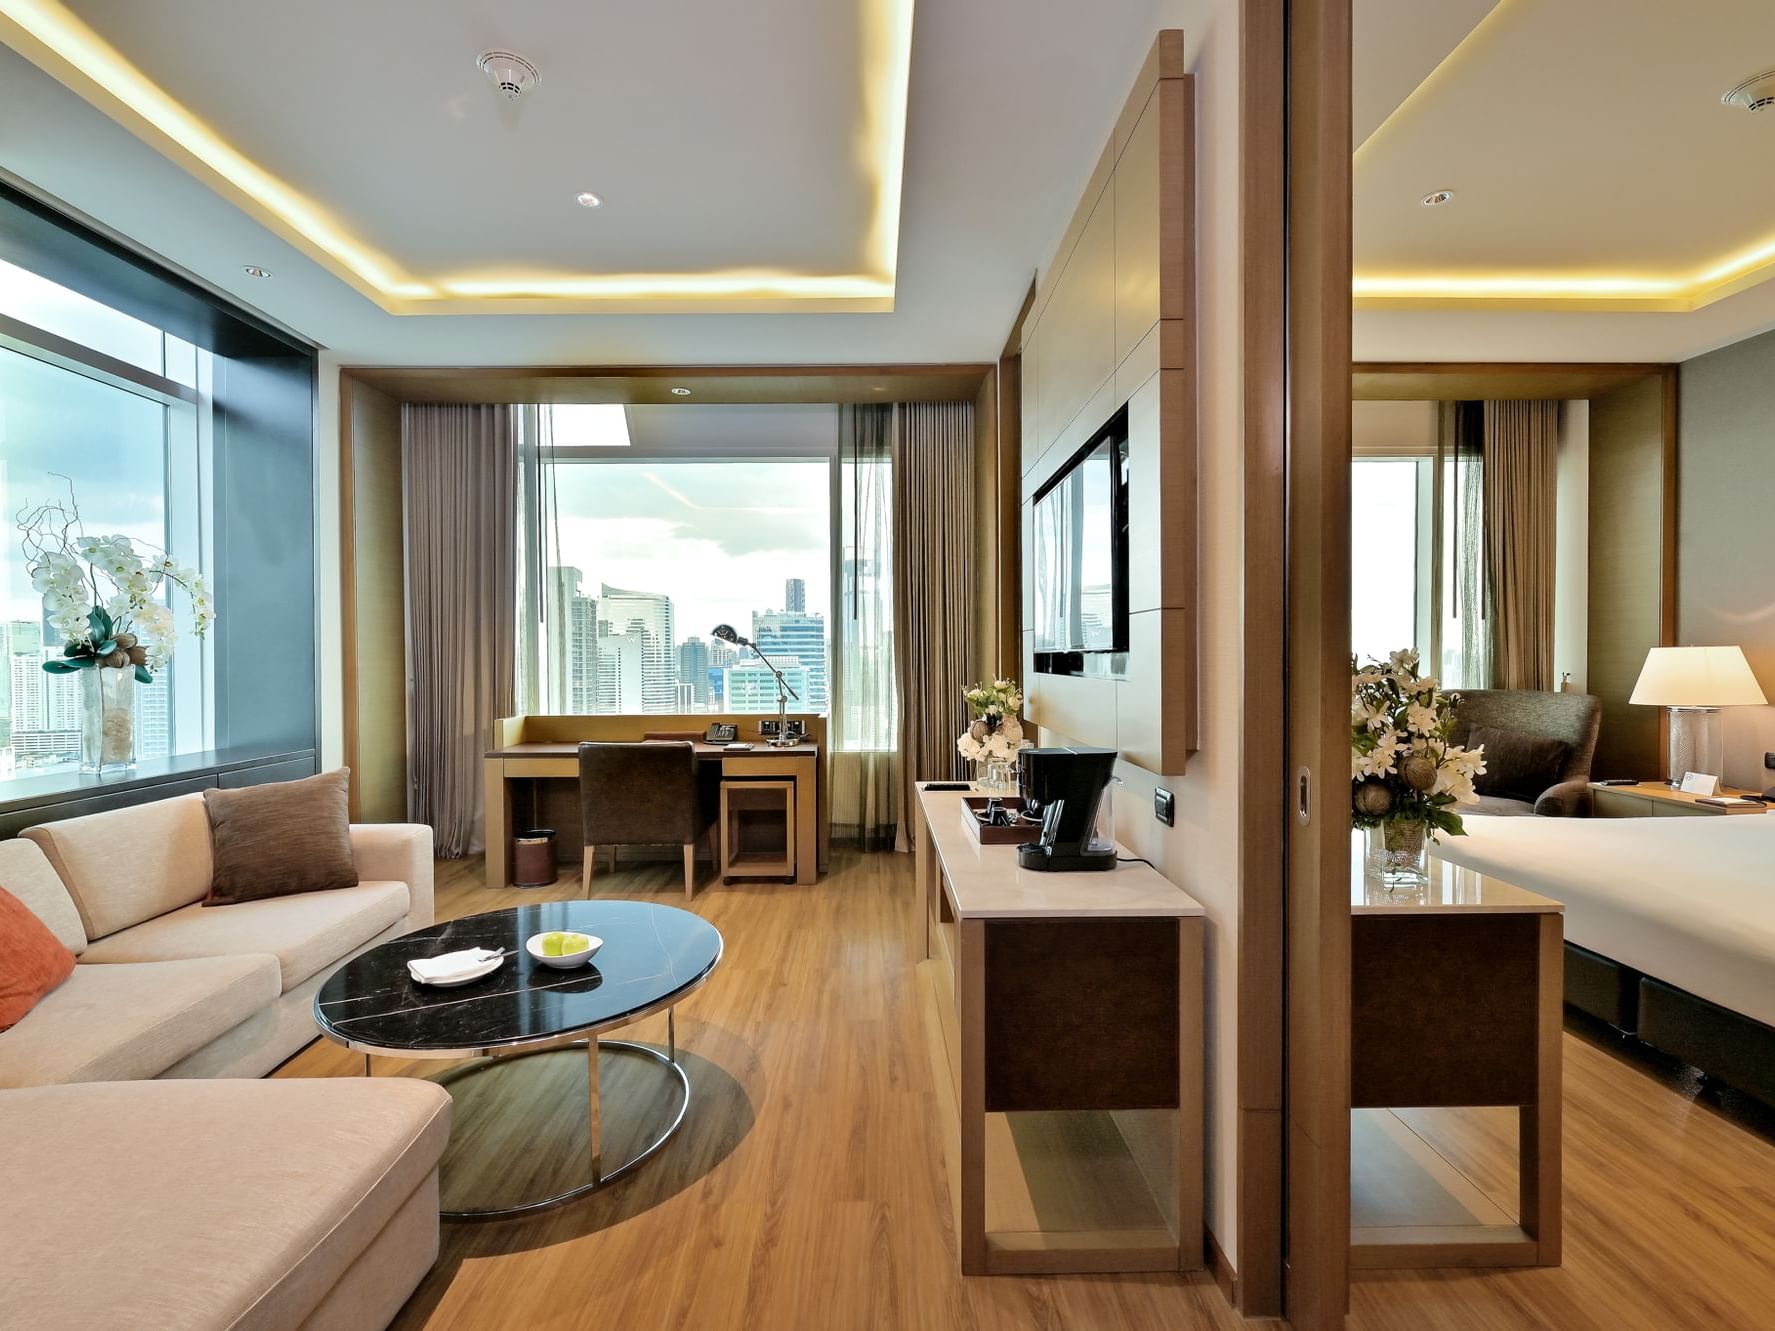 Junior Suite living area with city view at Eastin Hotels